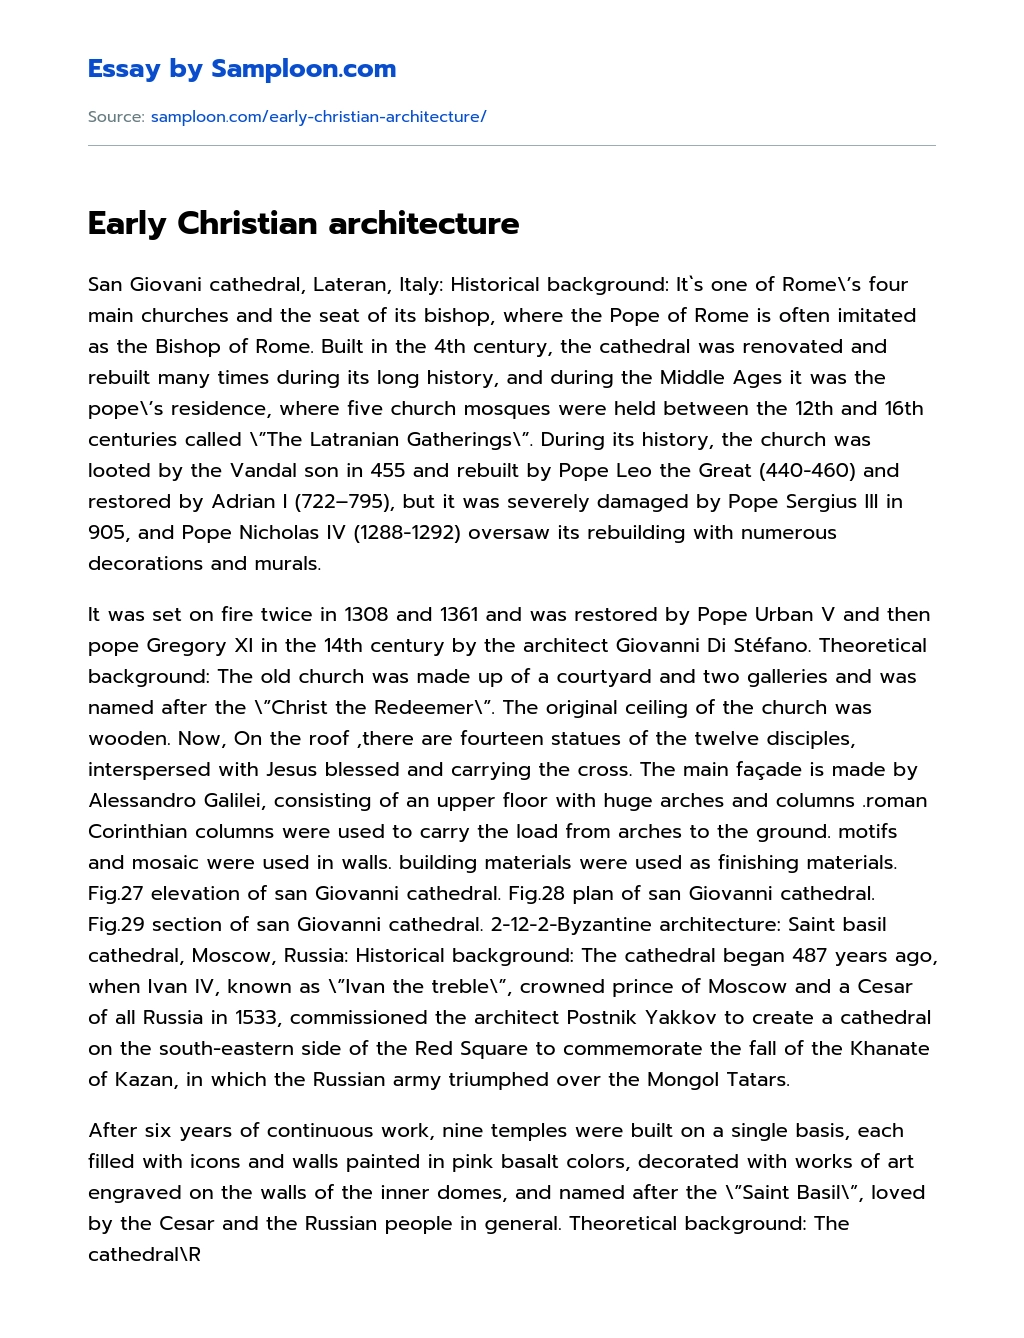 Early Christian architecture essay